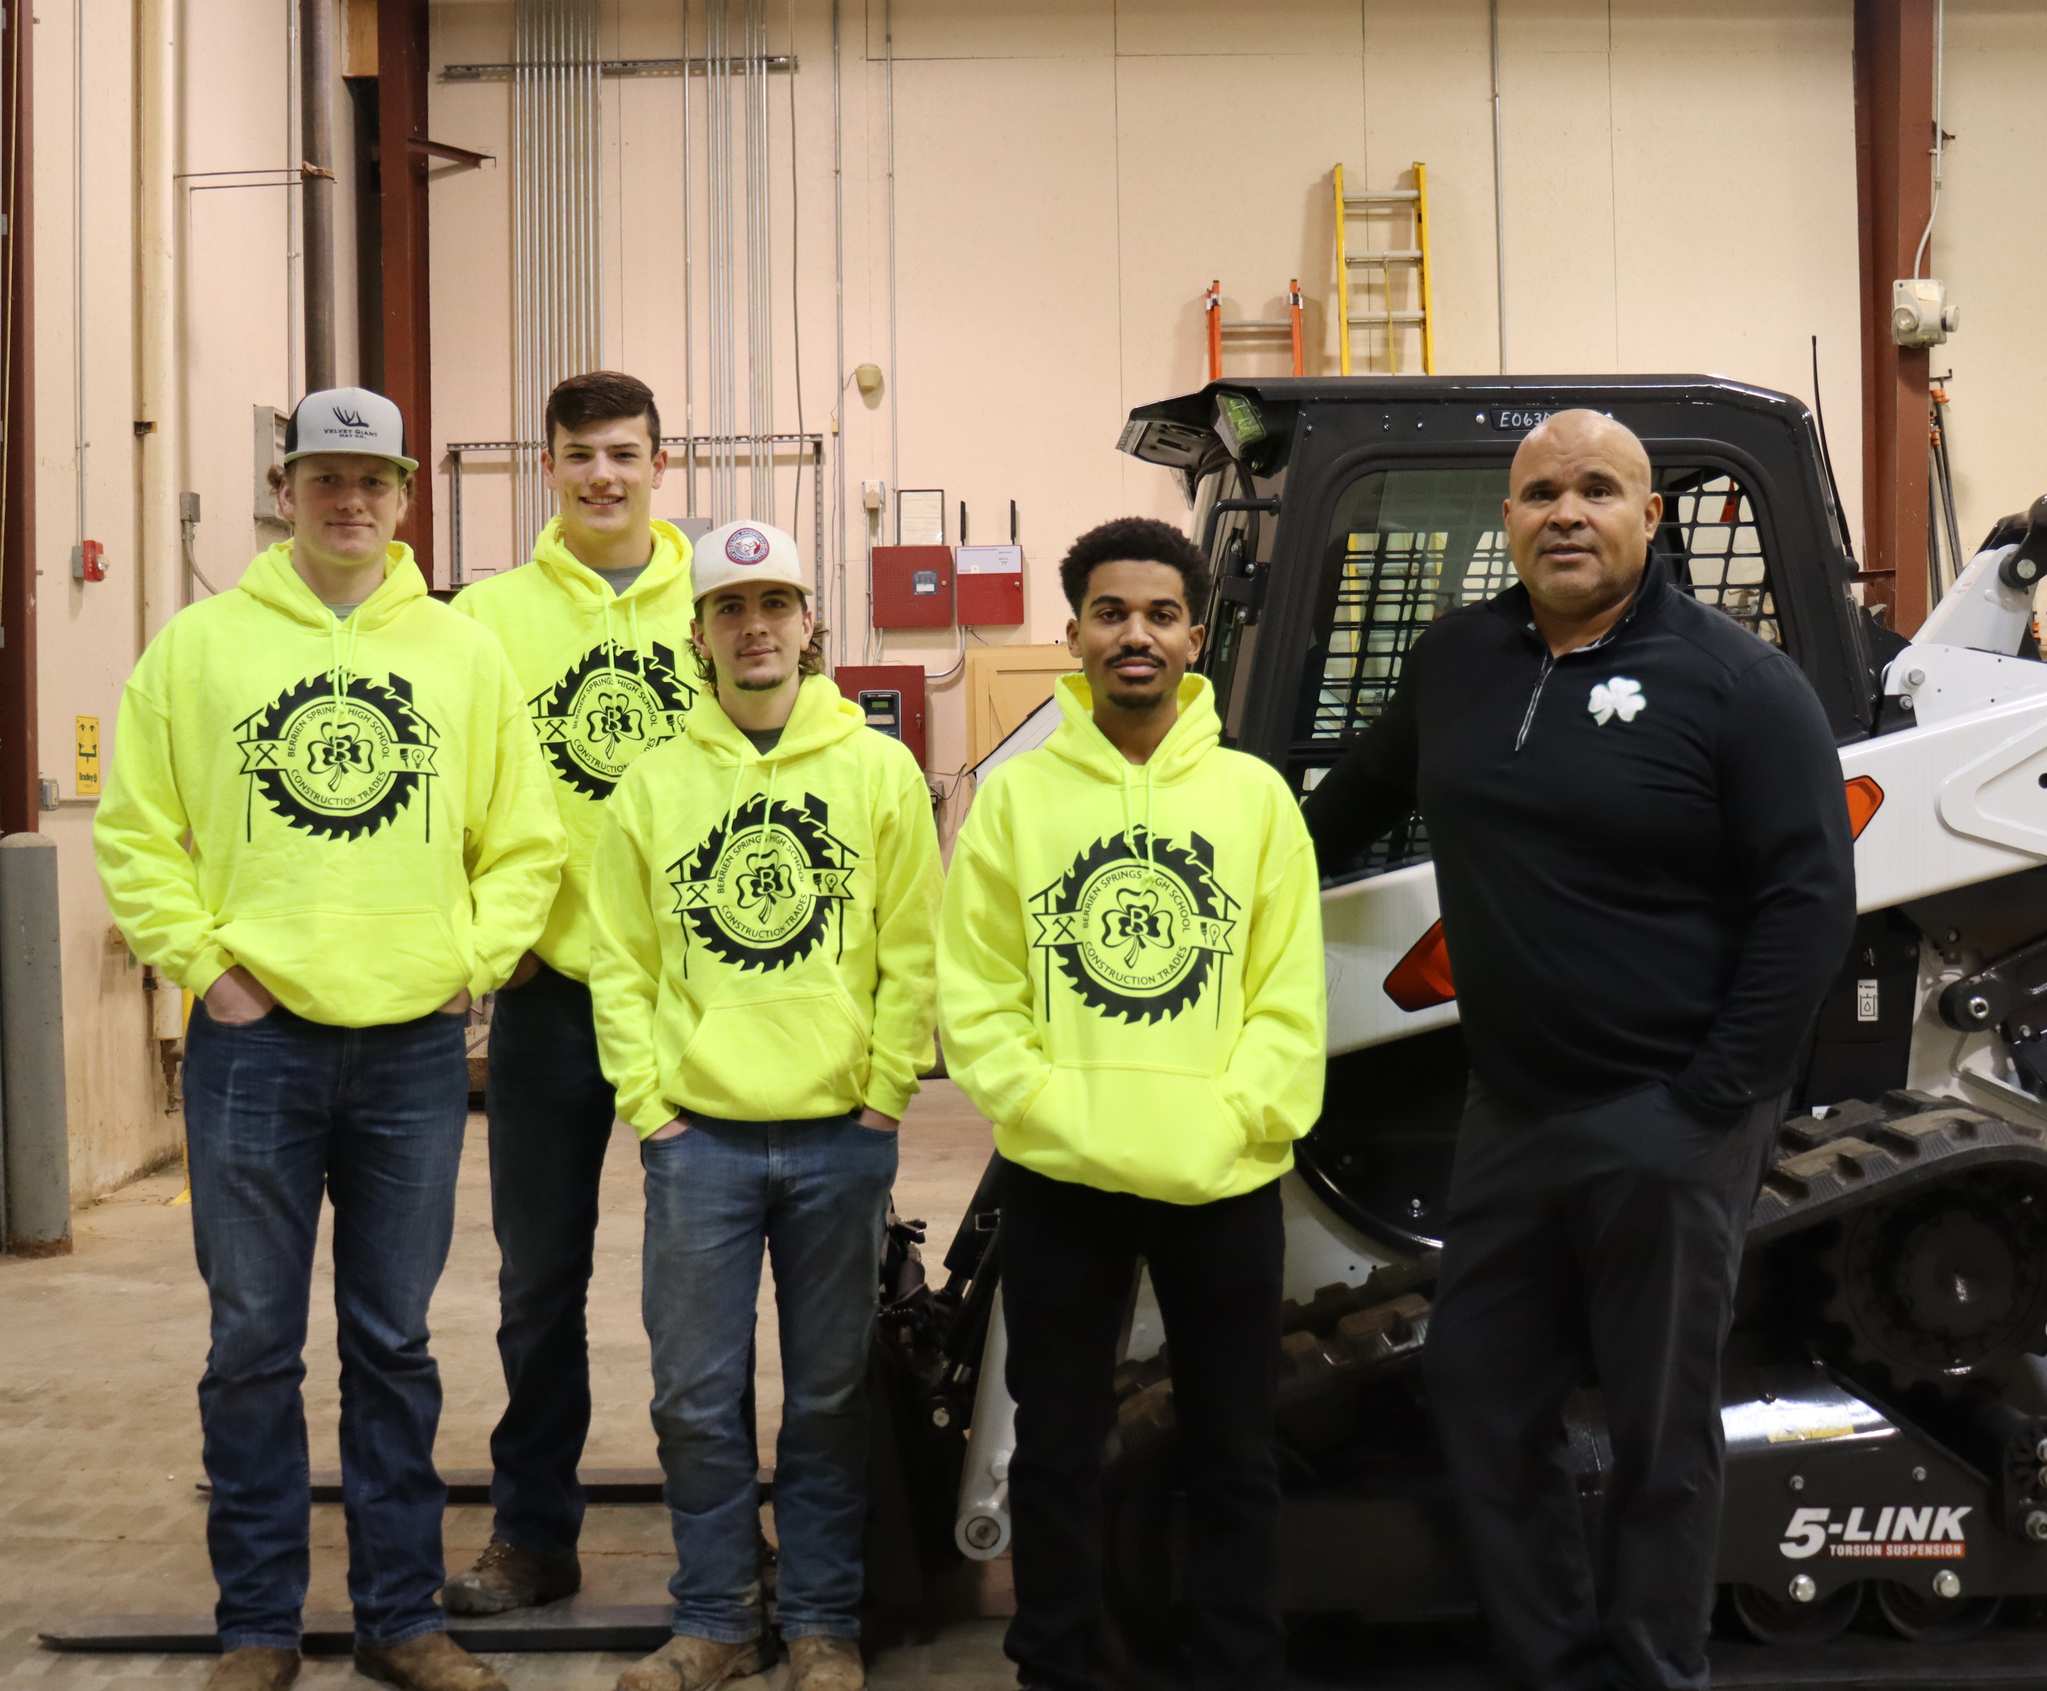 CTE Construction Trades Students and CTE Director Mr. Anderson